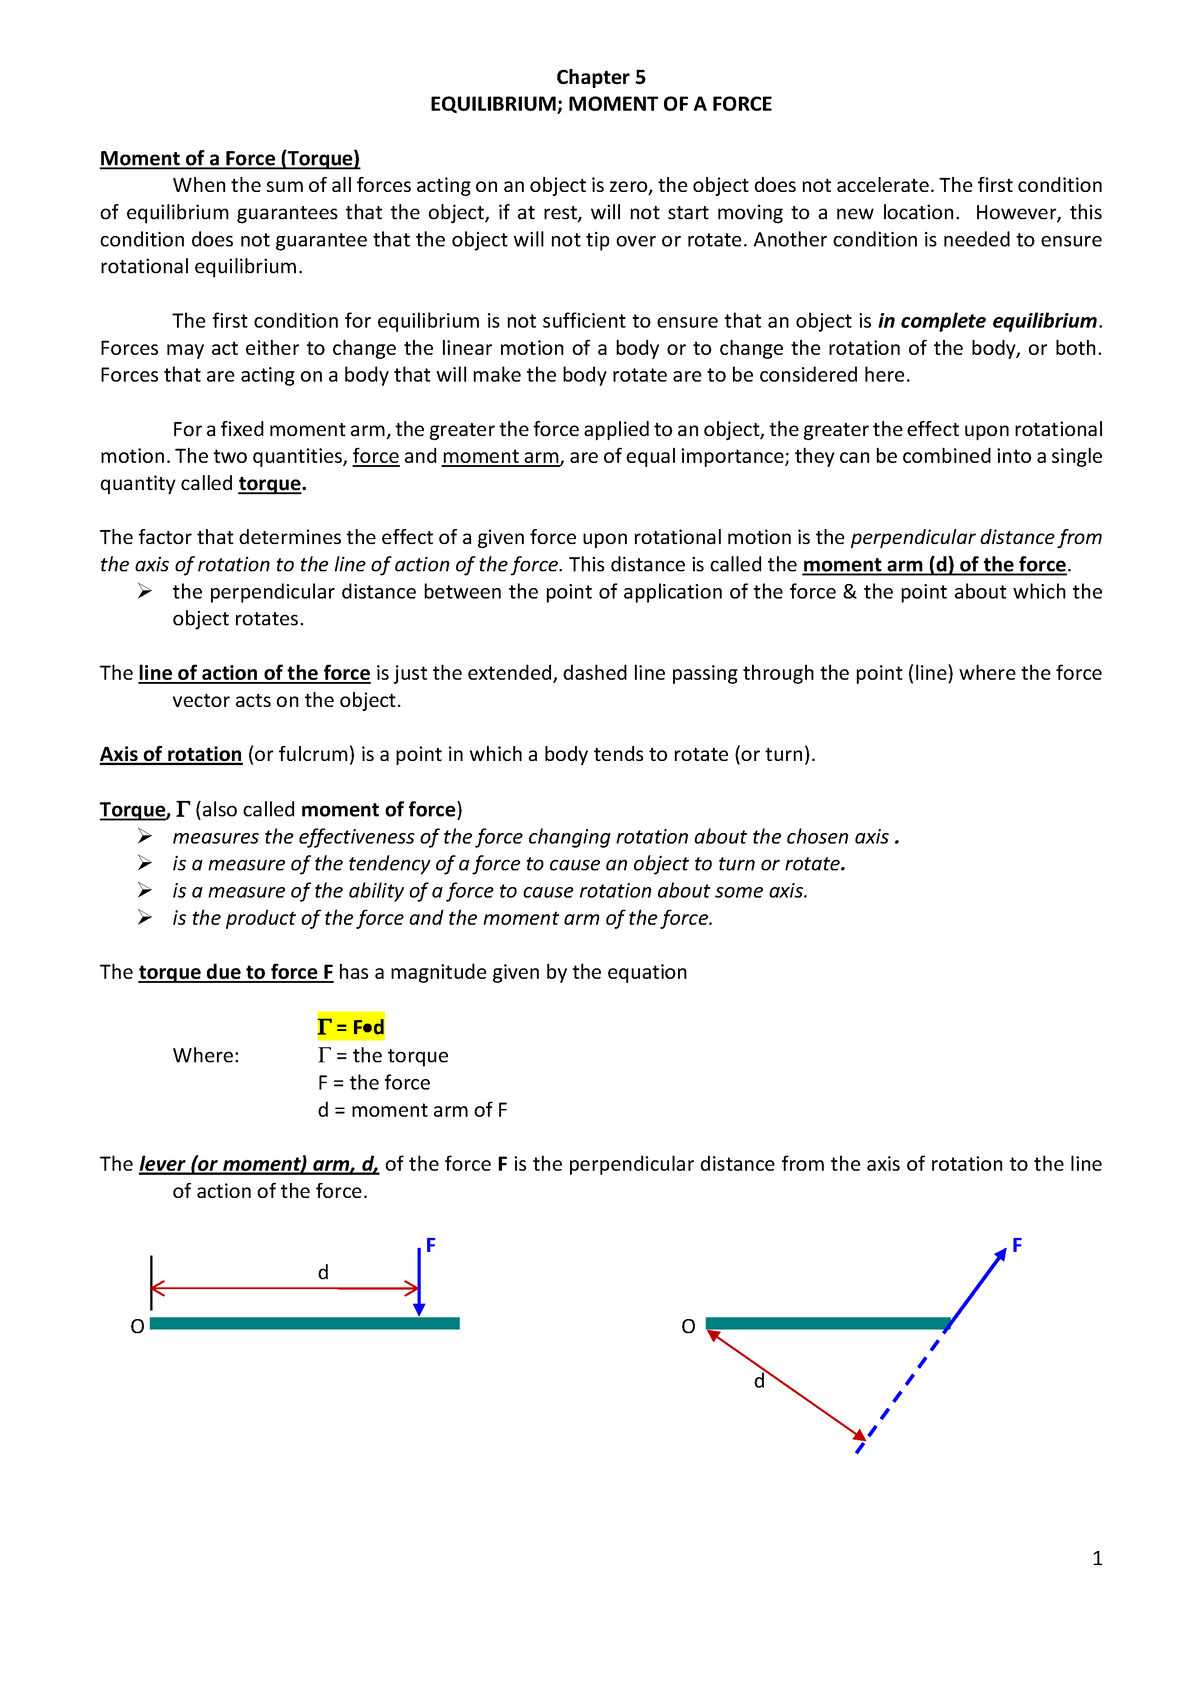 Chapter 5 summary - Chapter 5 EQUILIBRIUM; MOMENT OF A FORCE Moment of ...